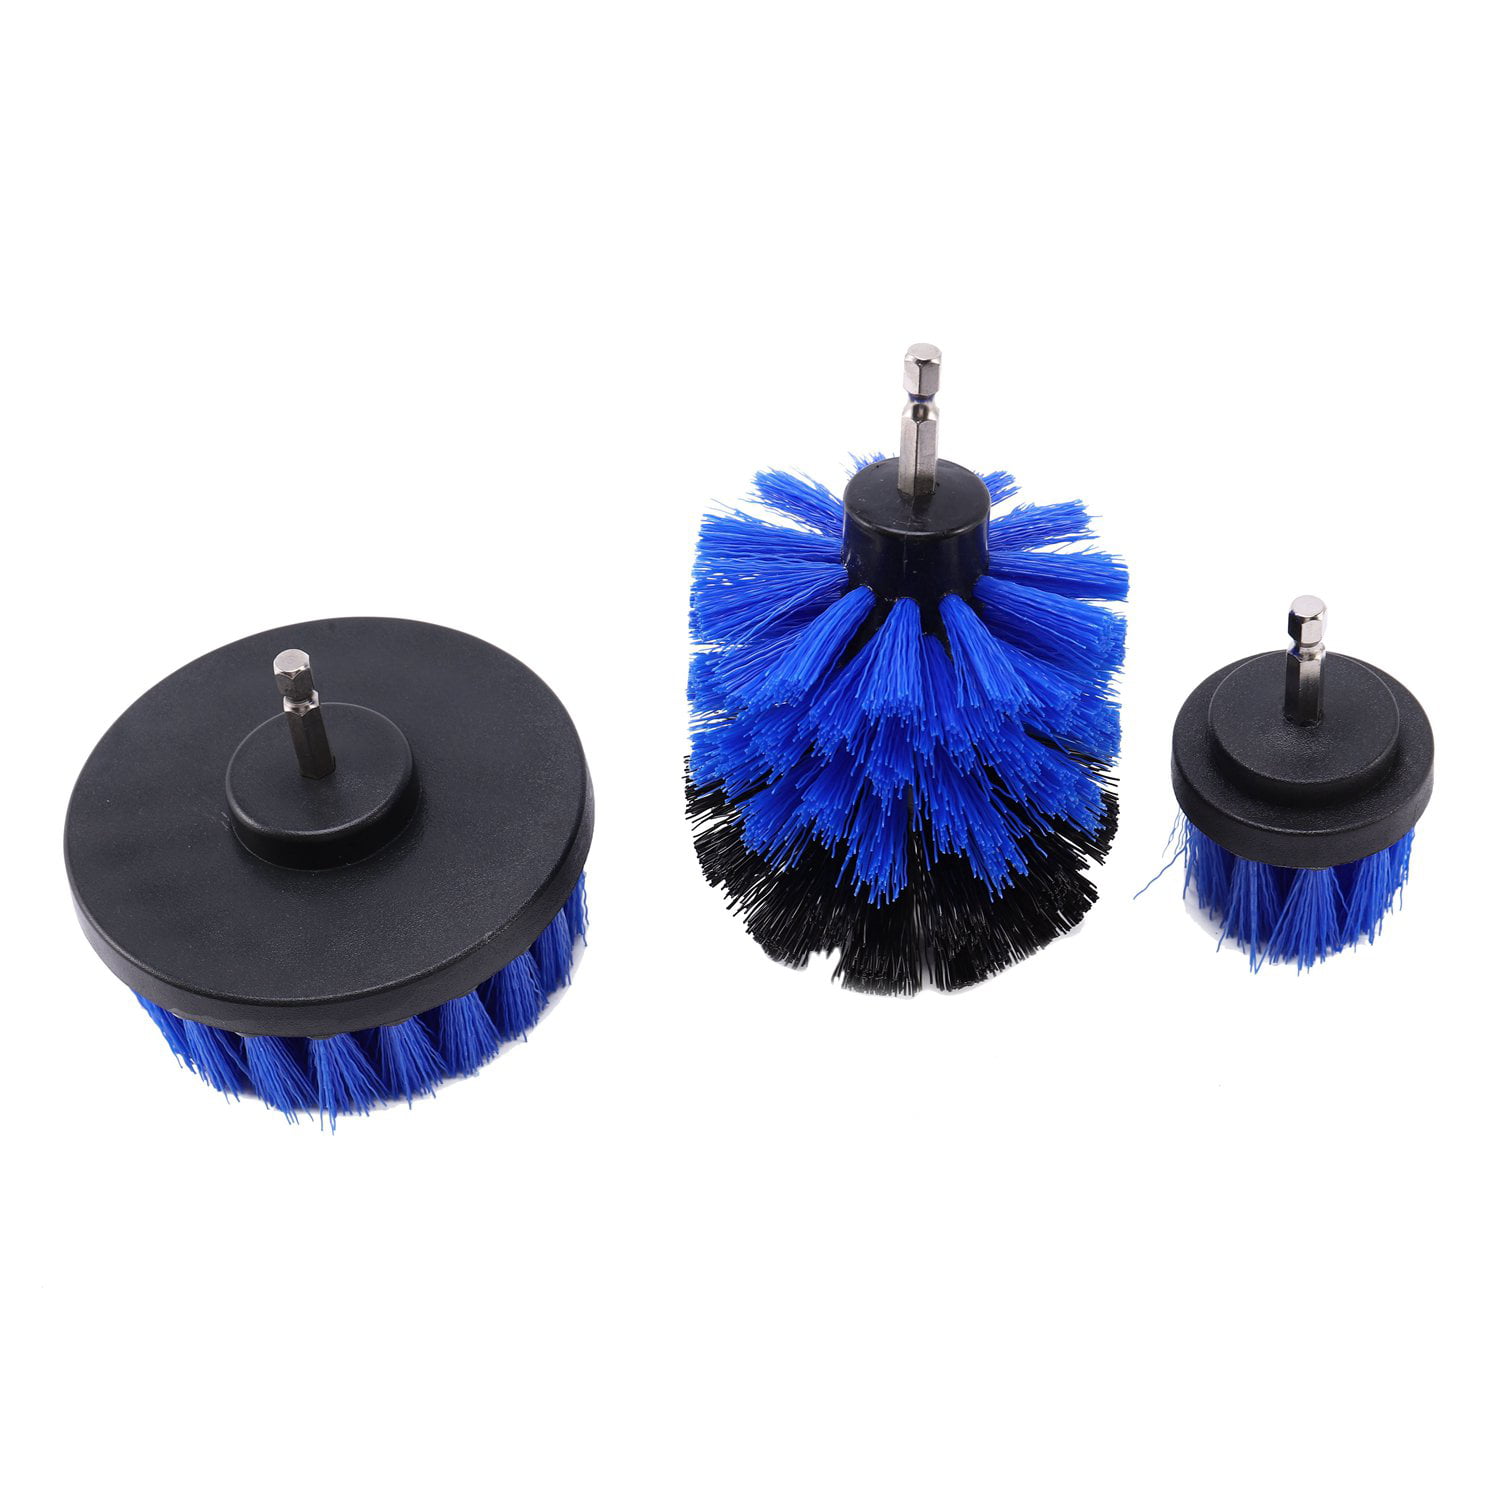 3 Pcs Power Scrubber Drill Brush Set Scrubber Shower Tile Grout Wall Spin Tub 